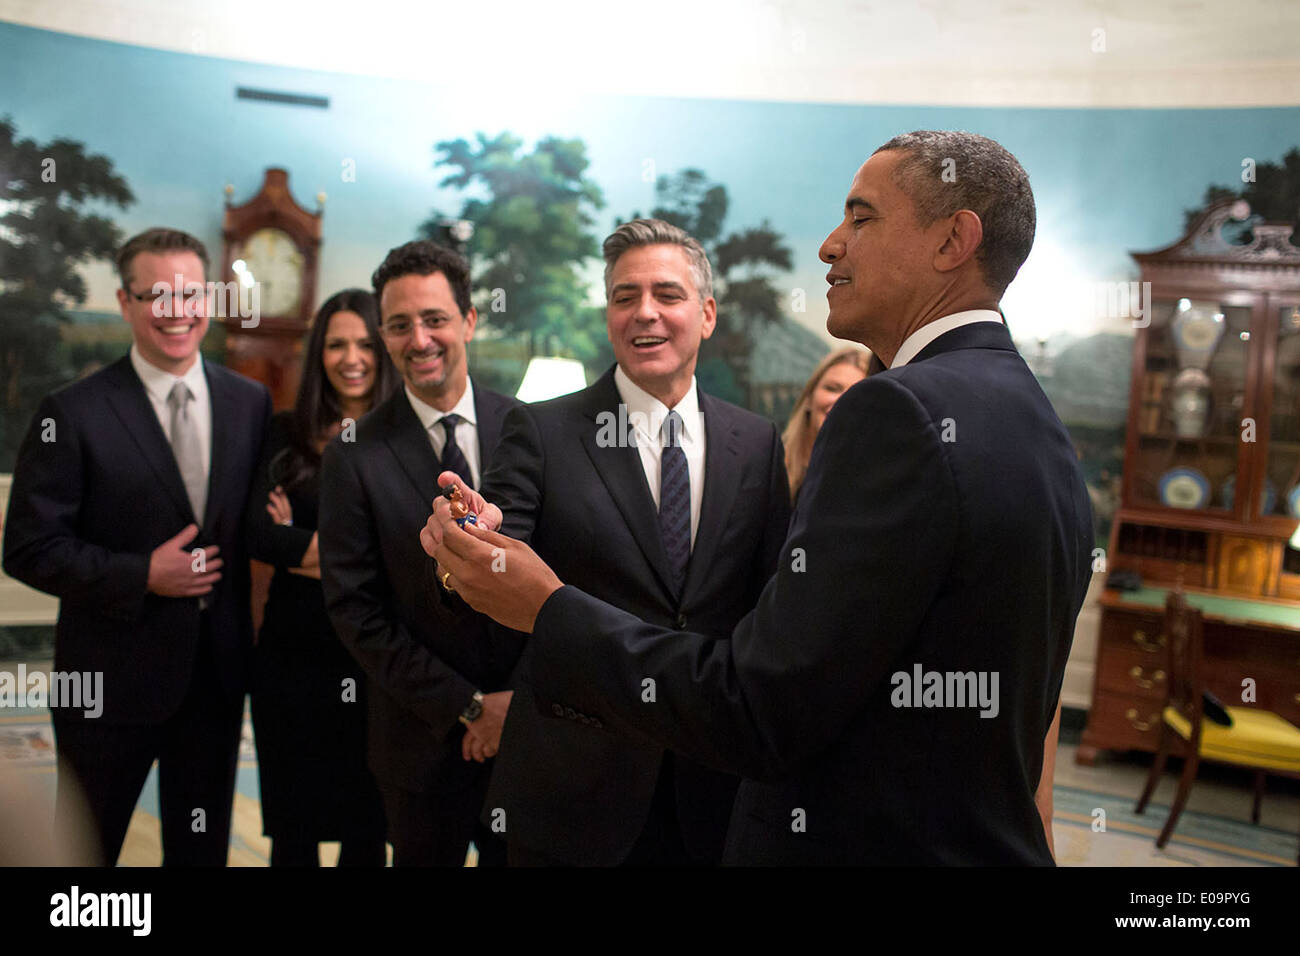 US President Barack Obama jokes with cast members of the movie The Monuments Men in the Diplomatic Reception Room prior to a movie screening in the Family Theater of the White House February 18, 2014 in Washington, DC. Standing from left are: Matt Damon and his wife Luciana Damon, Grant Heslov, and George Clooney. Stock Photo